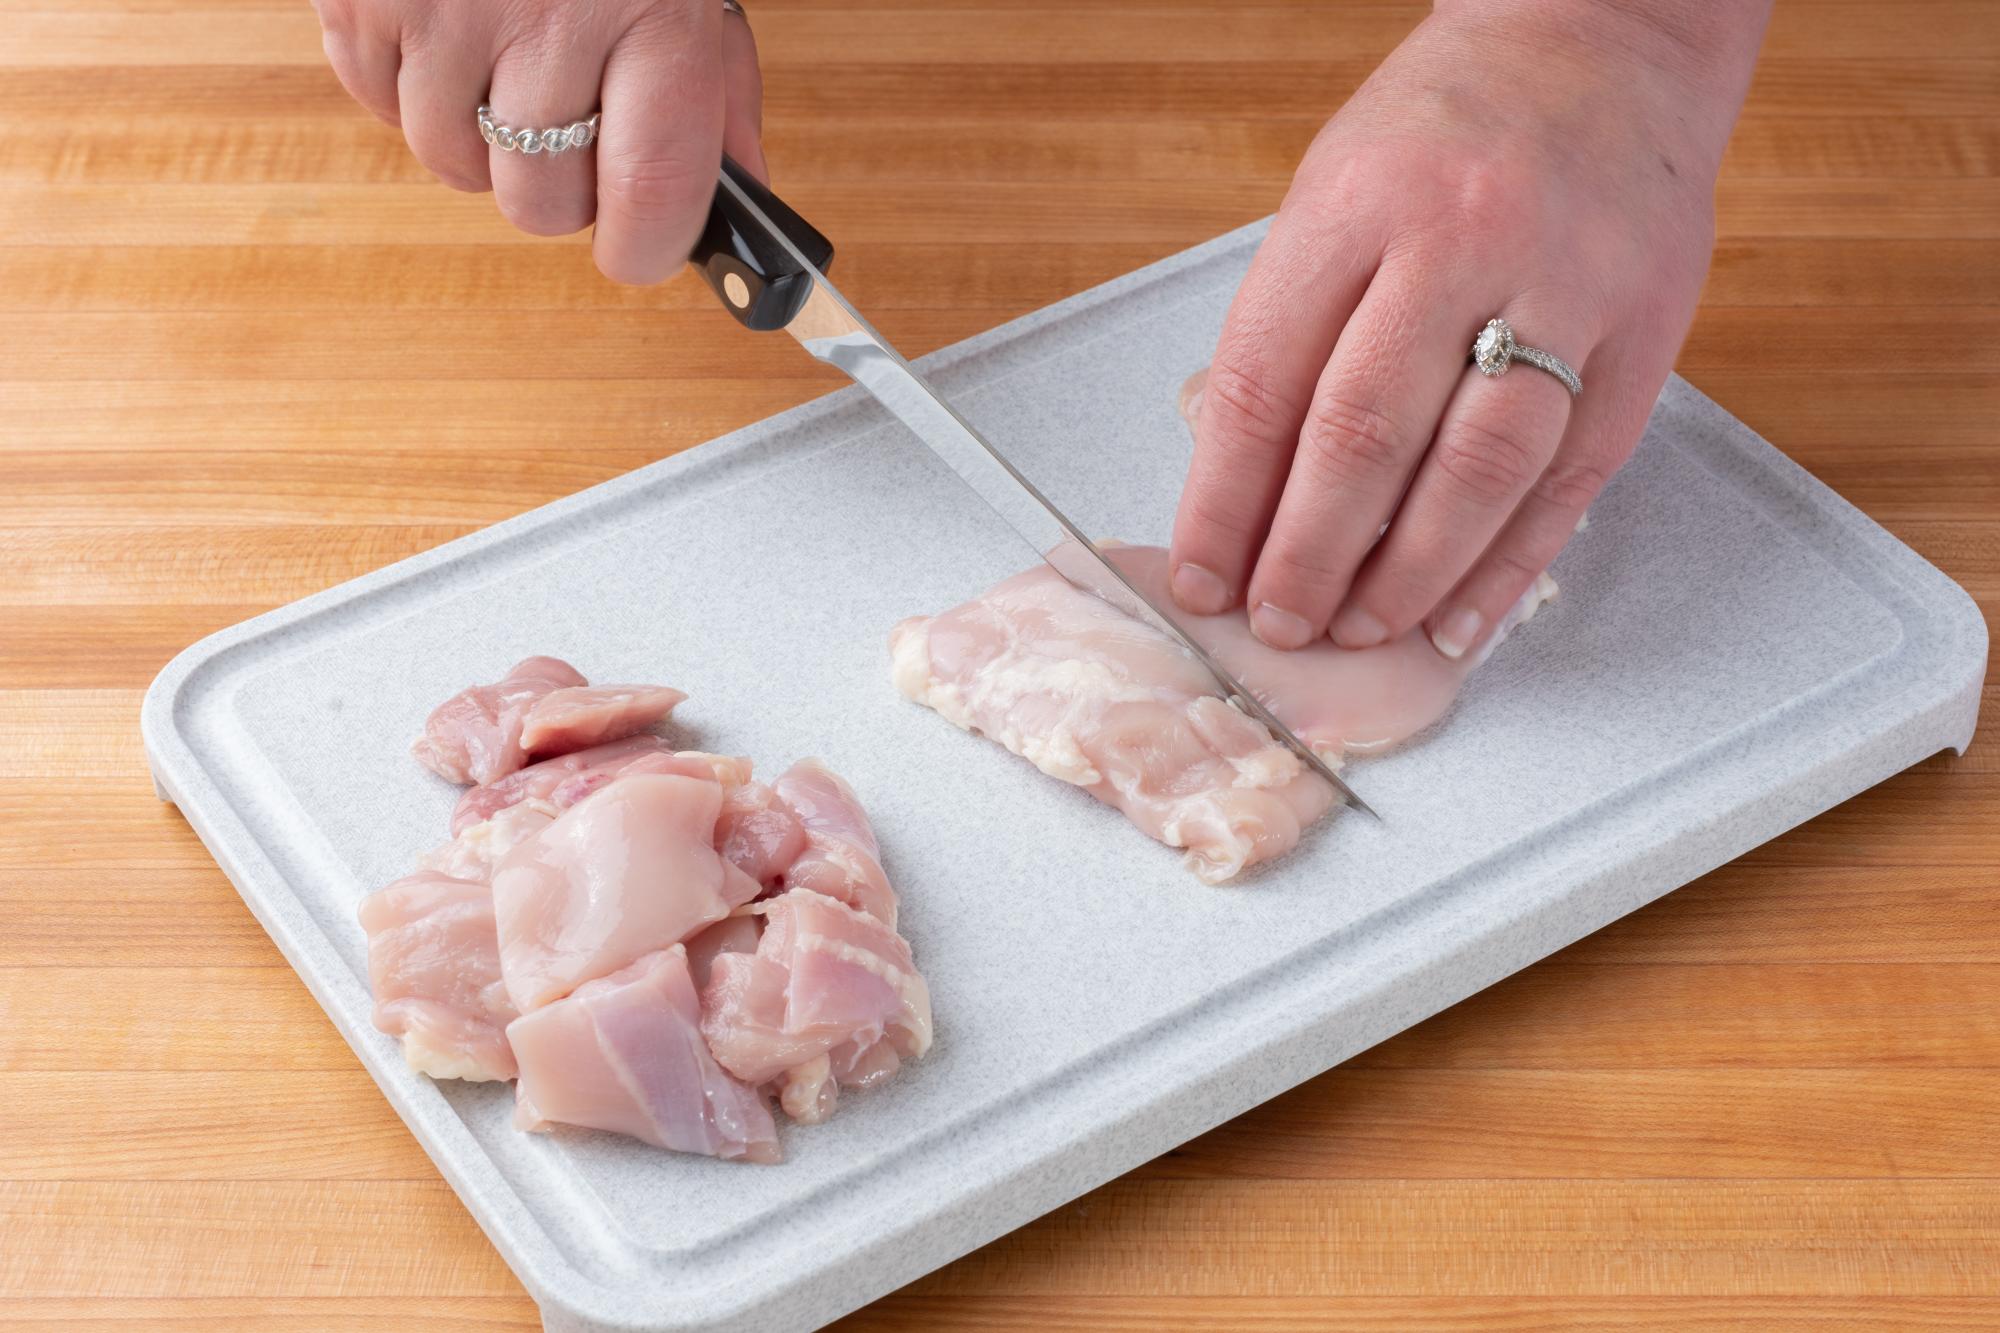 Cutting the chicken into pieces with a Boning Knife.